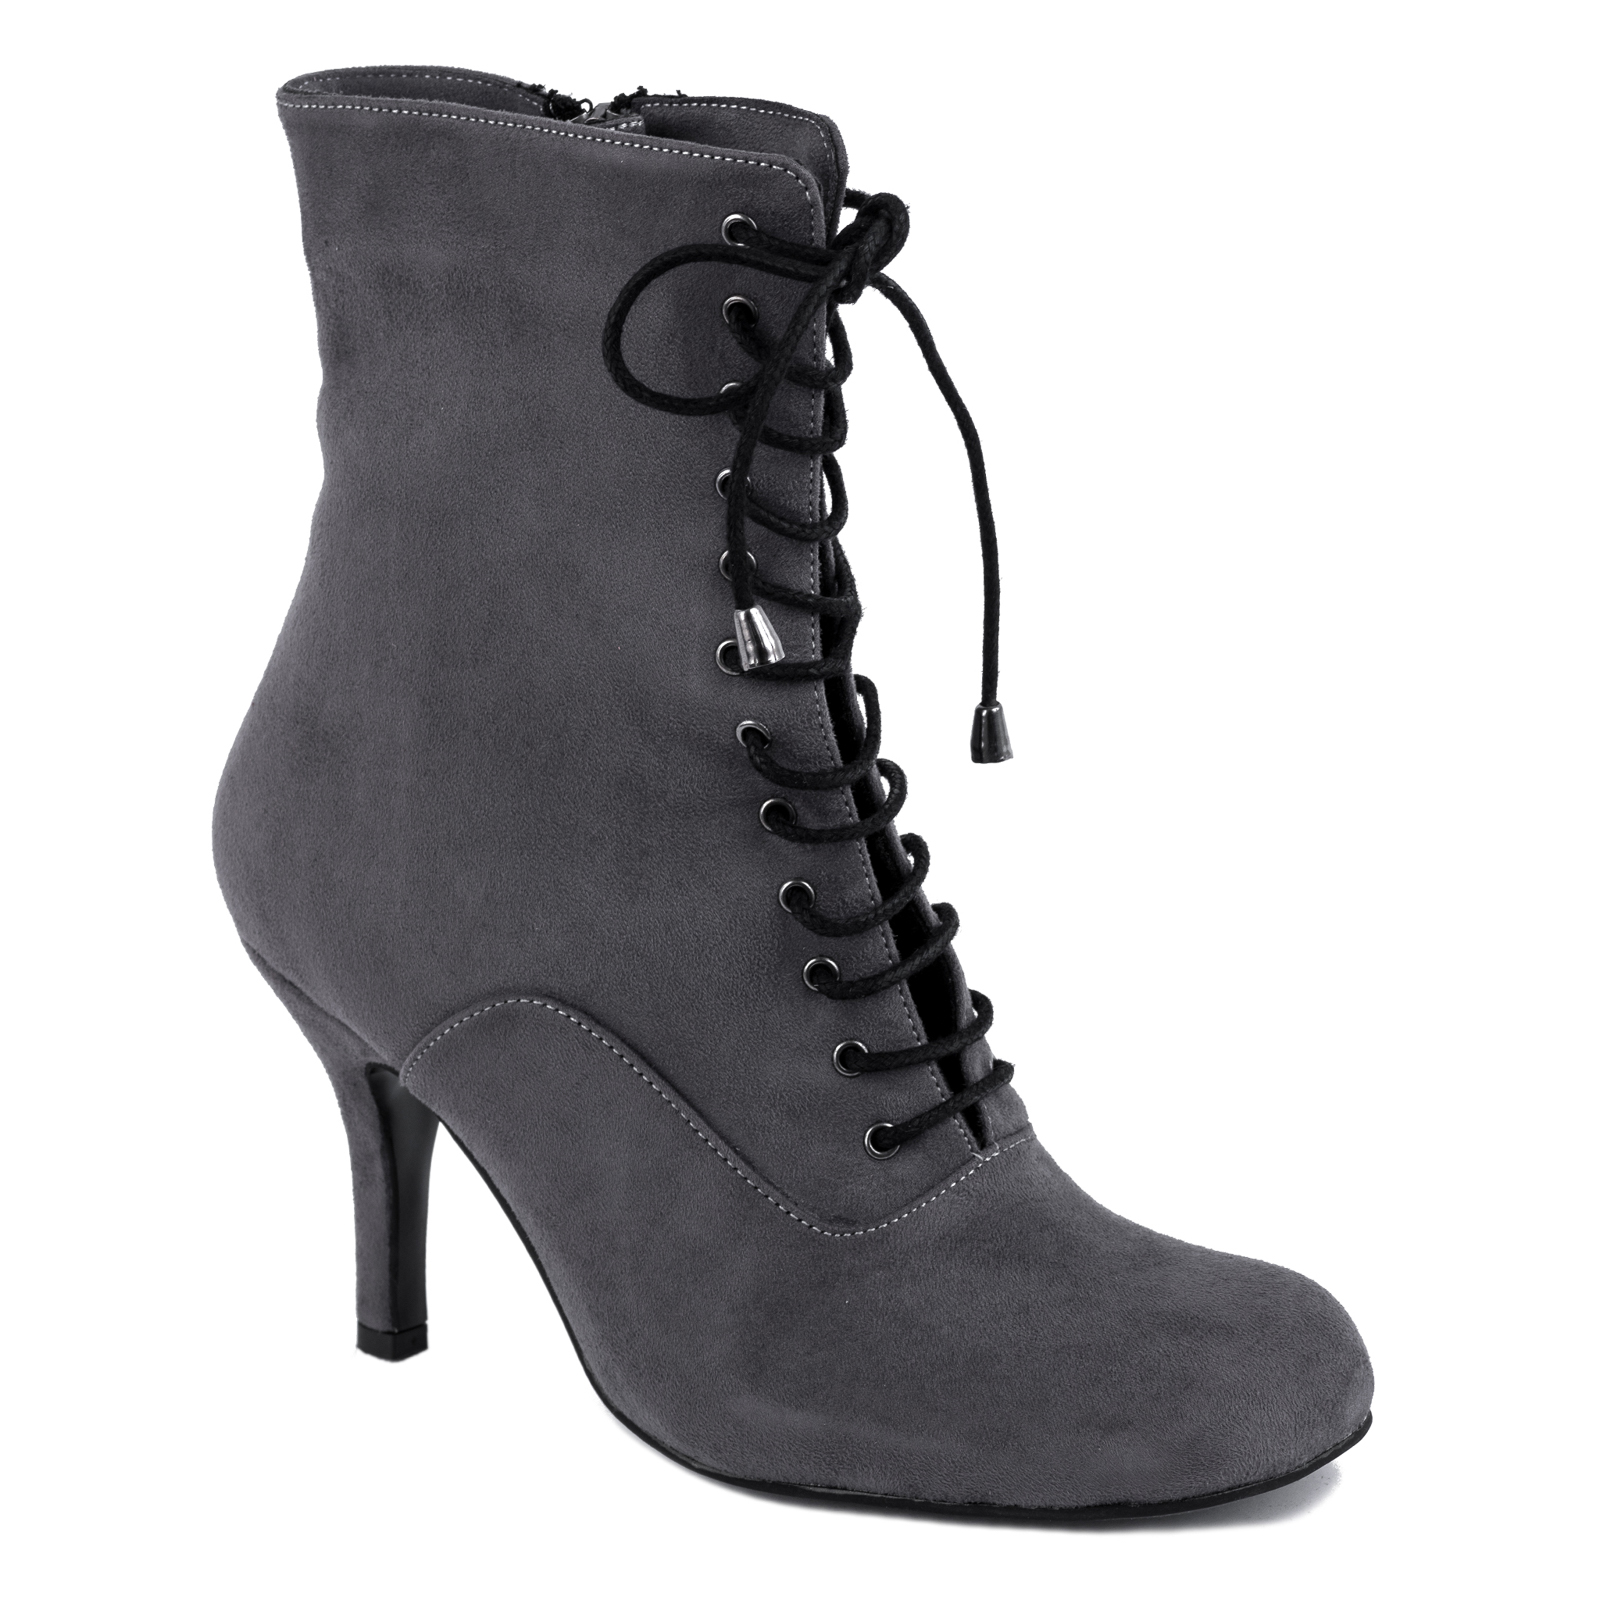 VELOUR LACE UP ANKLE BOOTS WITH THIN HEEL - GRAY